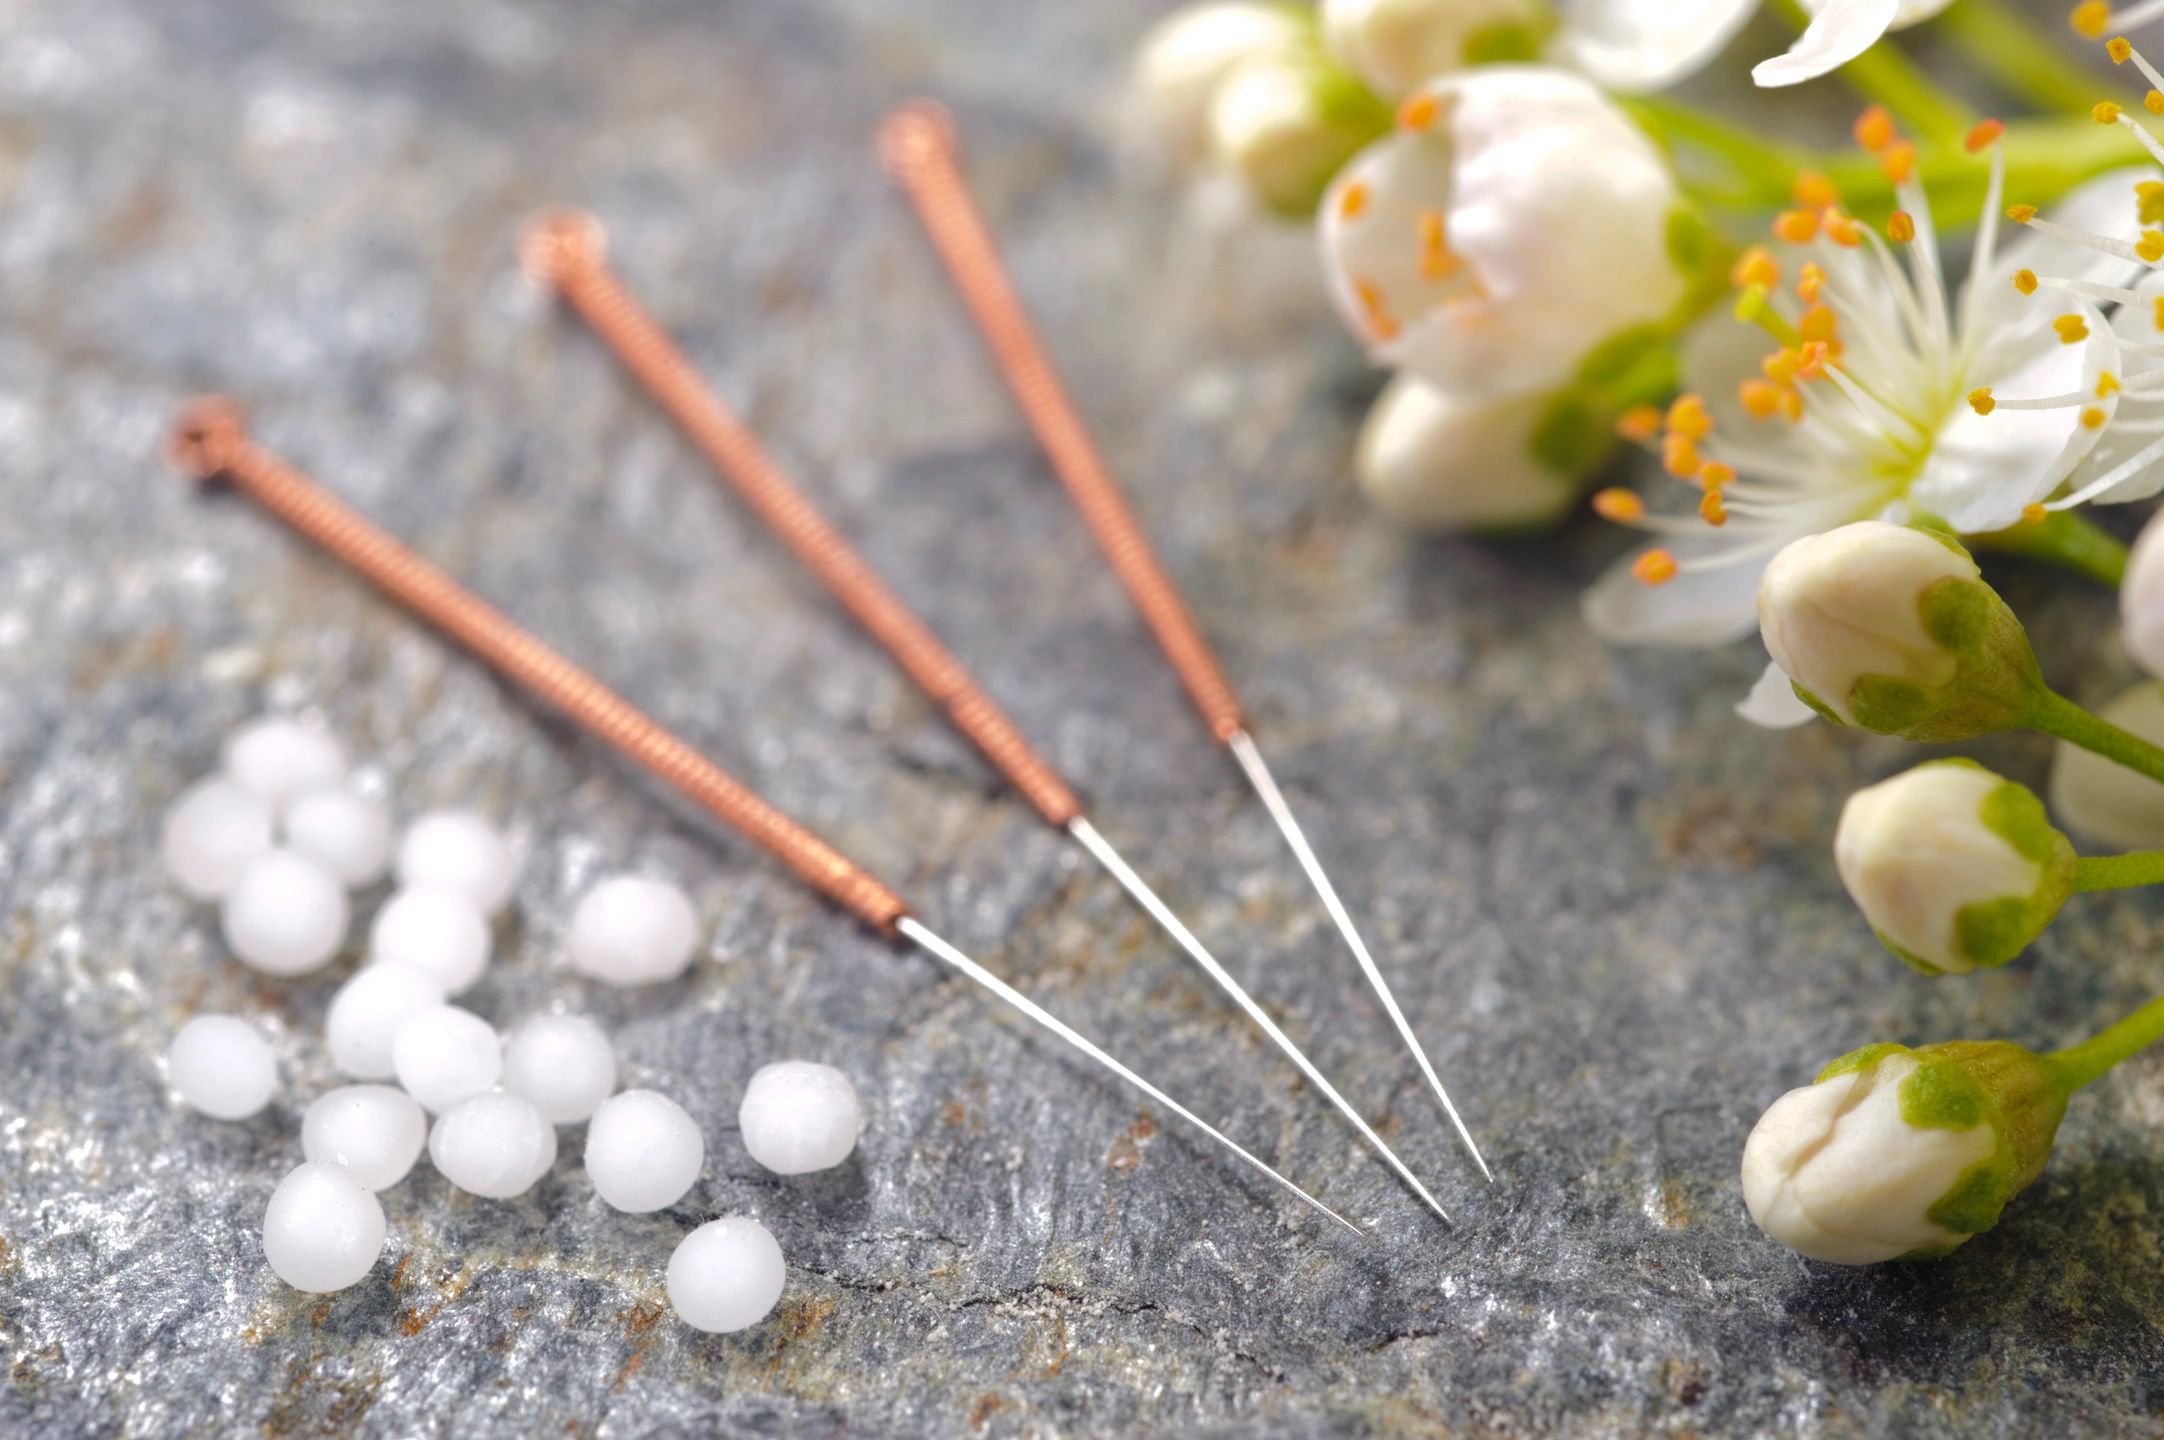 Acupuncture in Houston